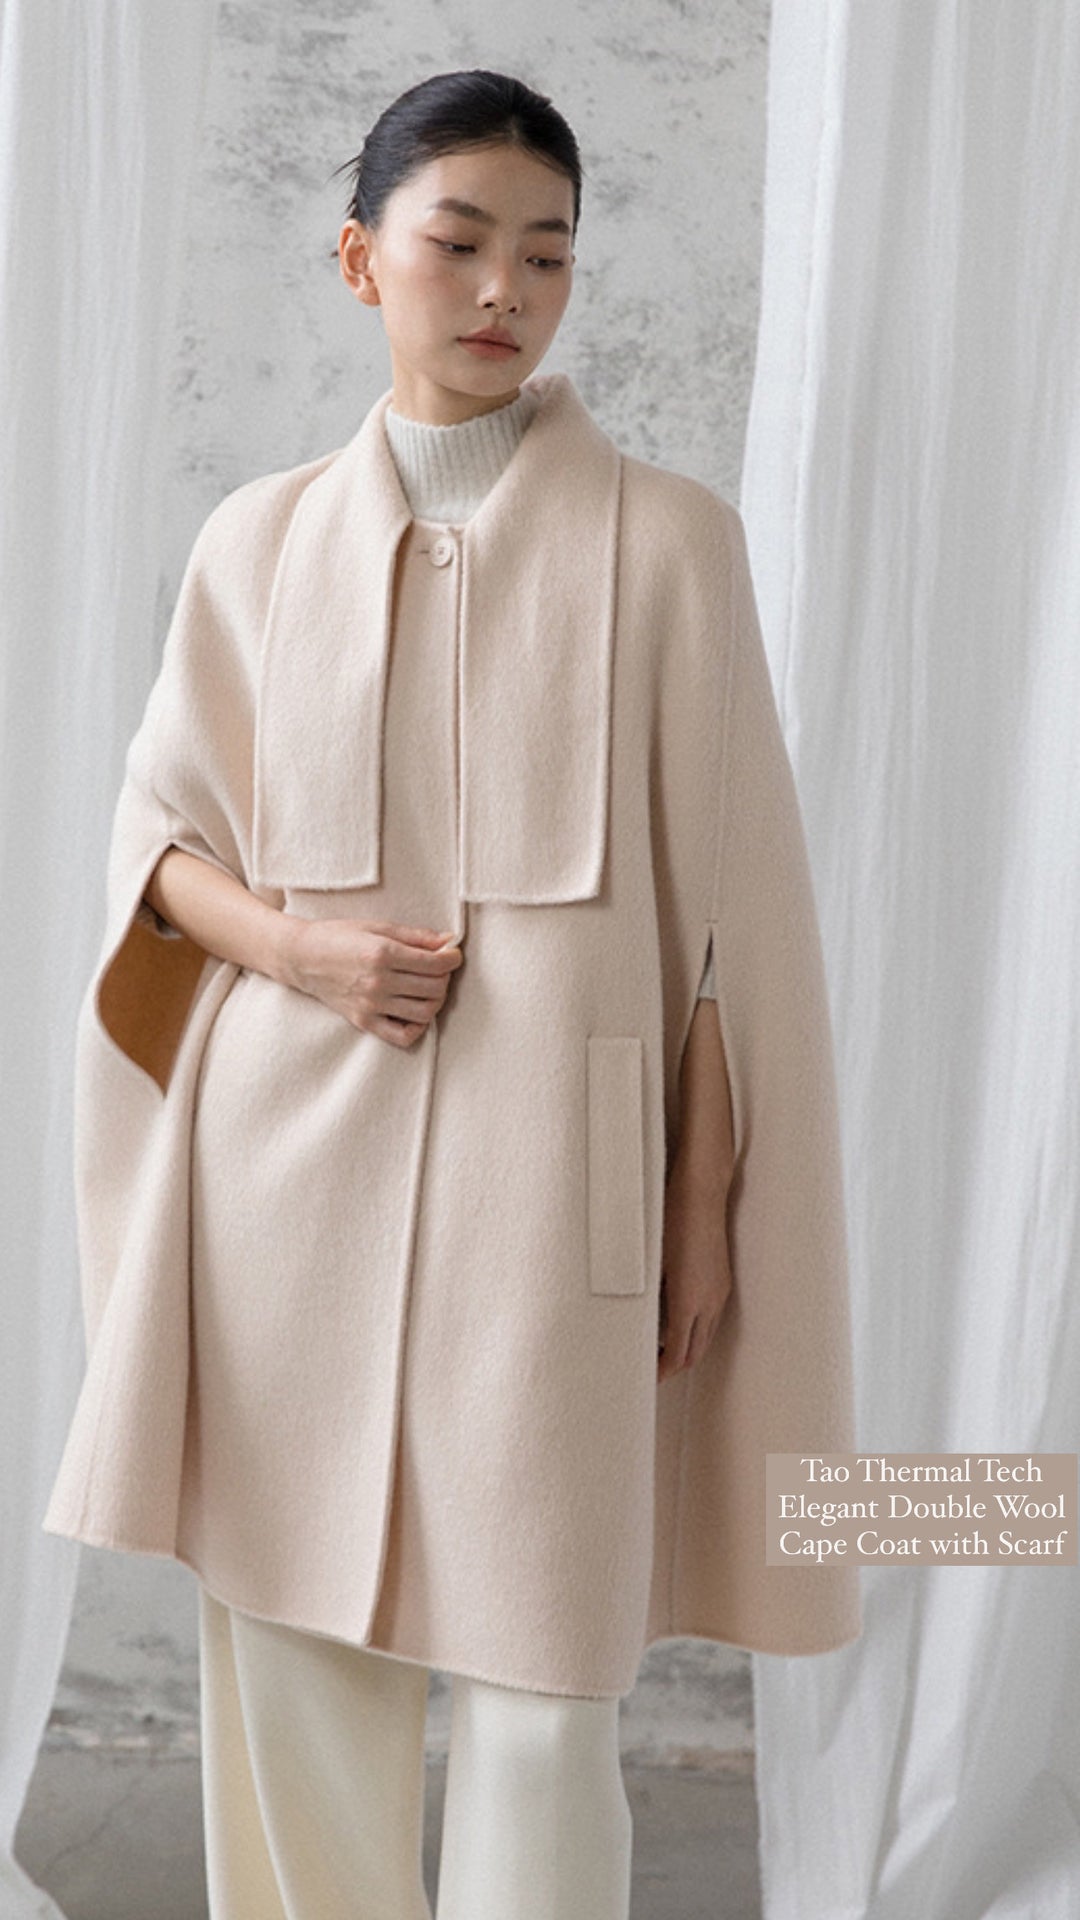 Tao Thermal Tech • Elegant Double Wool Cape • Coat with Scarf • 100% Australian Wool • High Vibrational Frequency